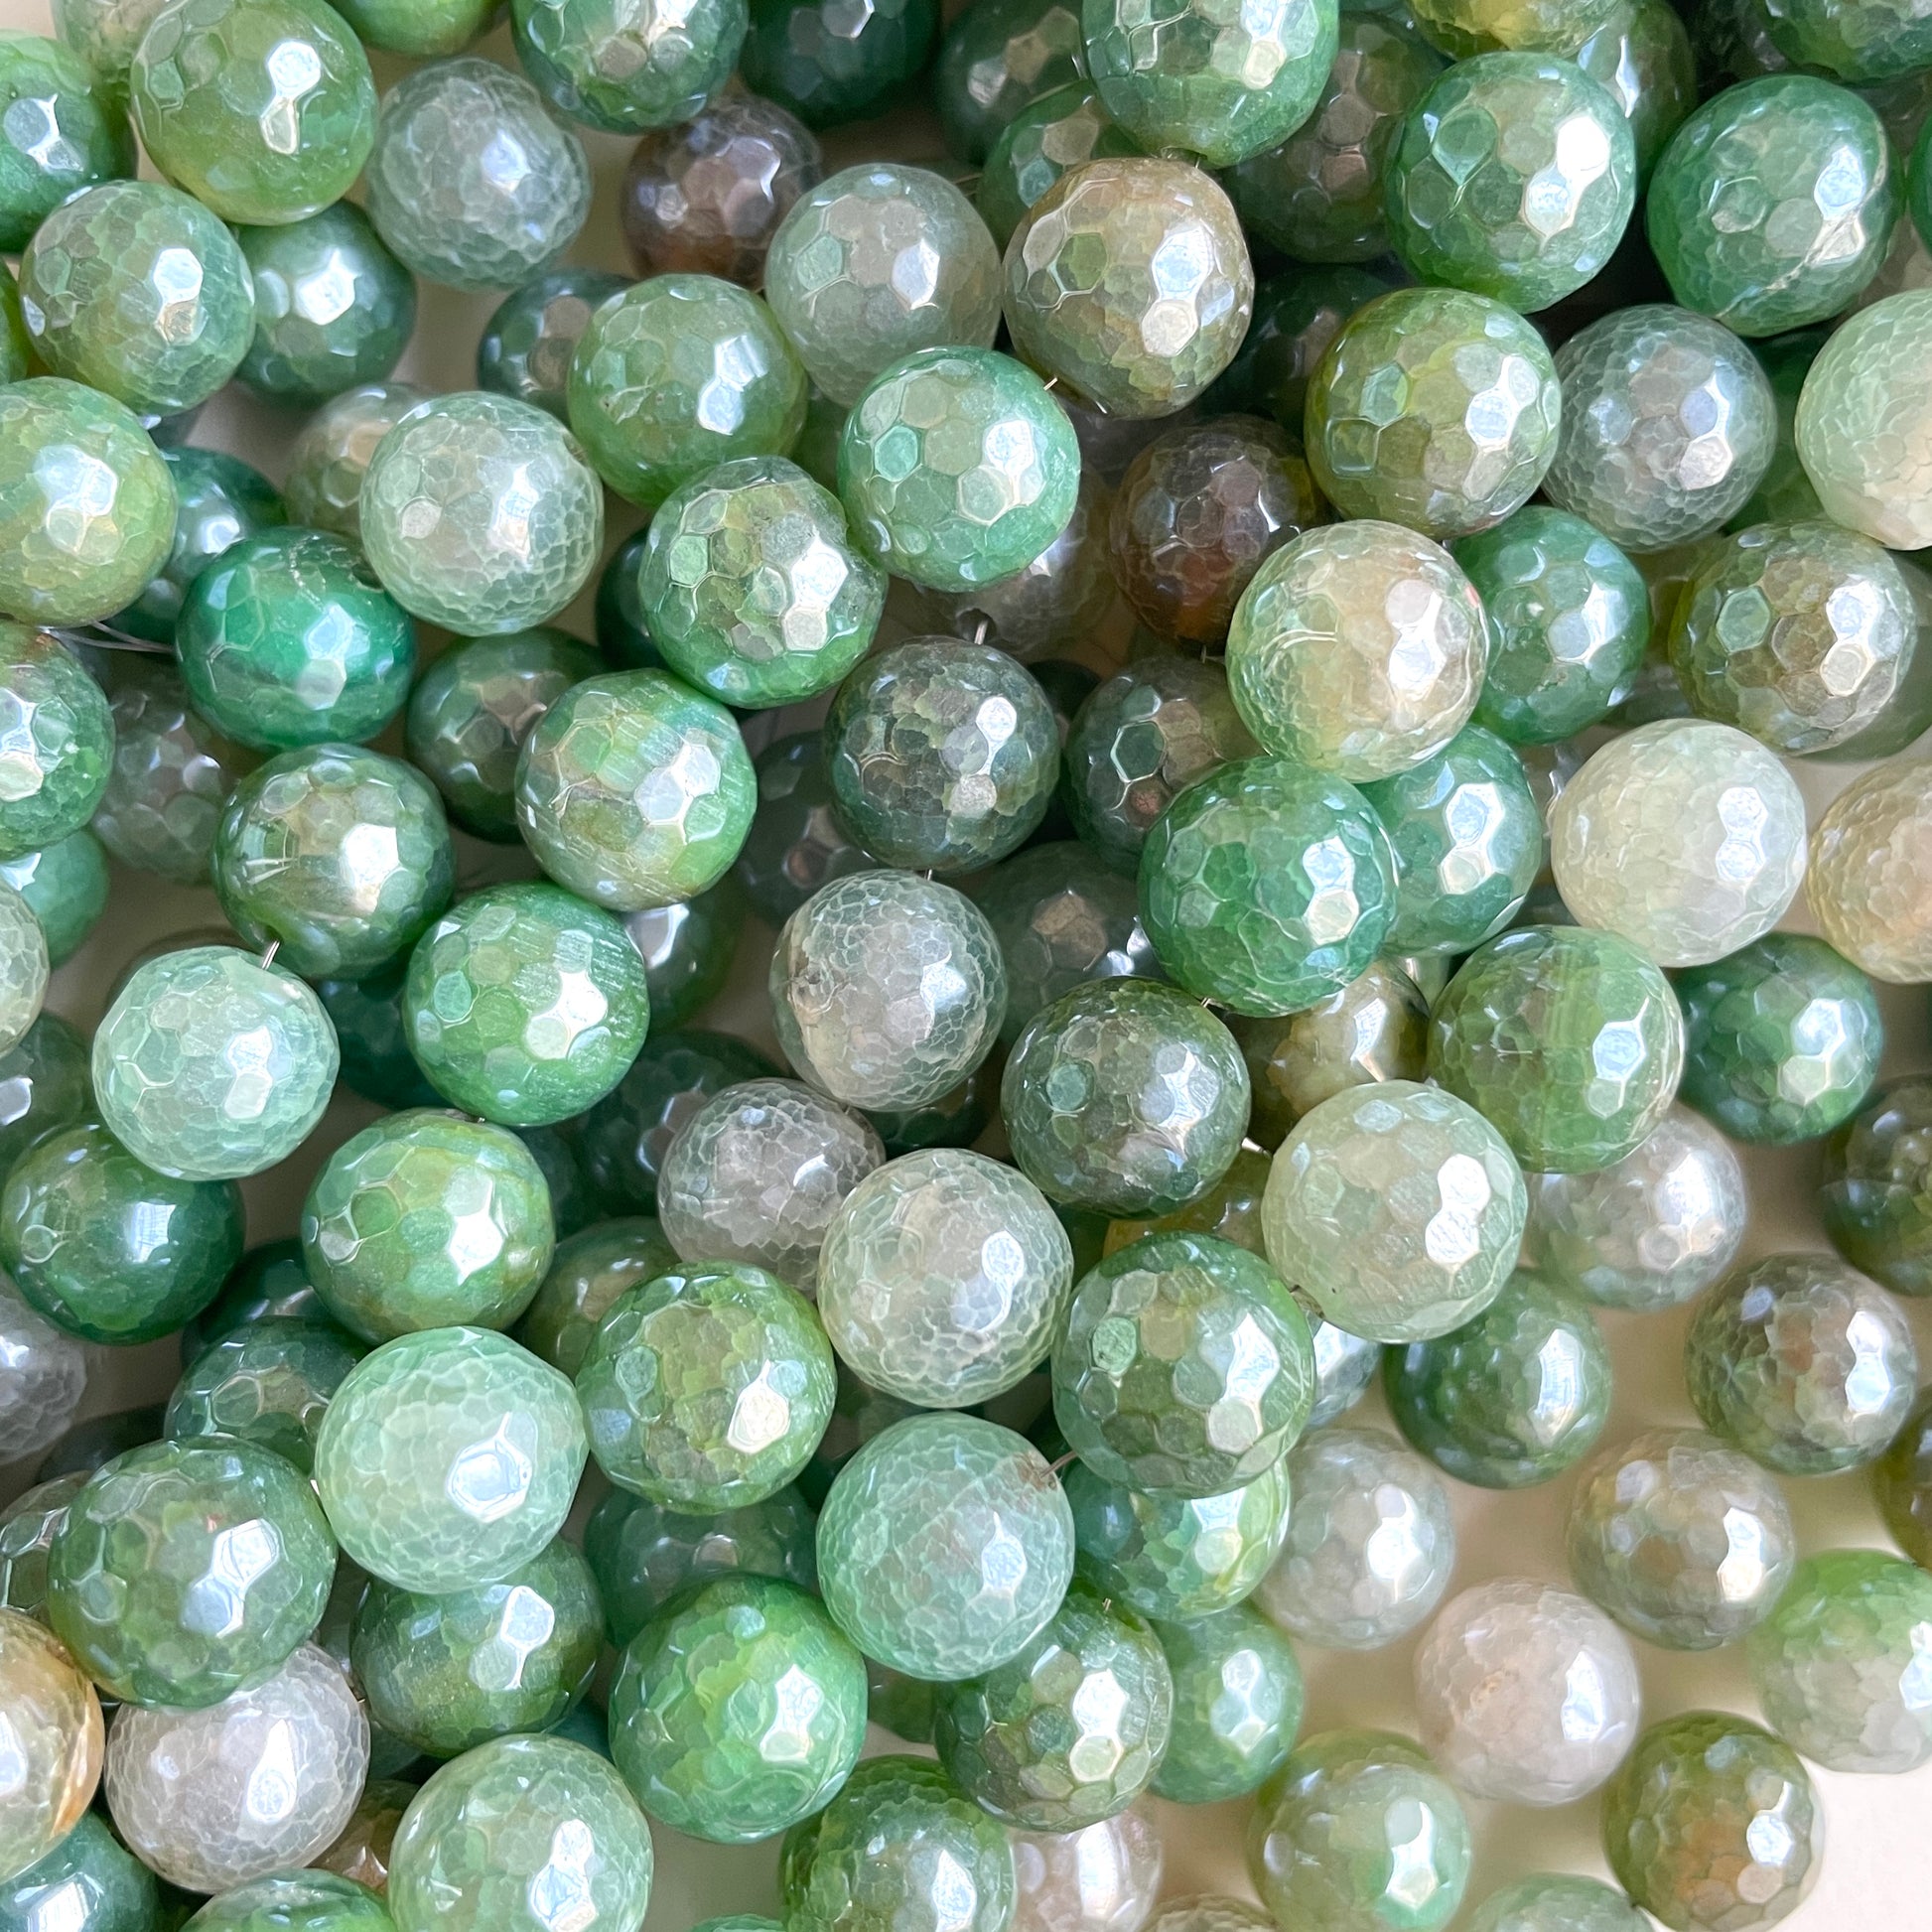 2 Strands/lot 10mm Electroplated Green Agate Faceted Stone Beads Electroplated Beads Electroplated Faceted Agate Beads New Beads Arrivals Charms Beads Beyond